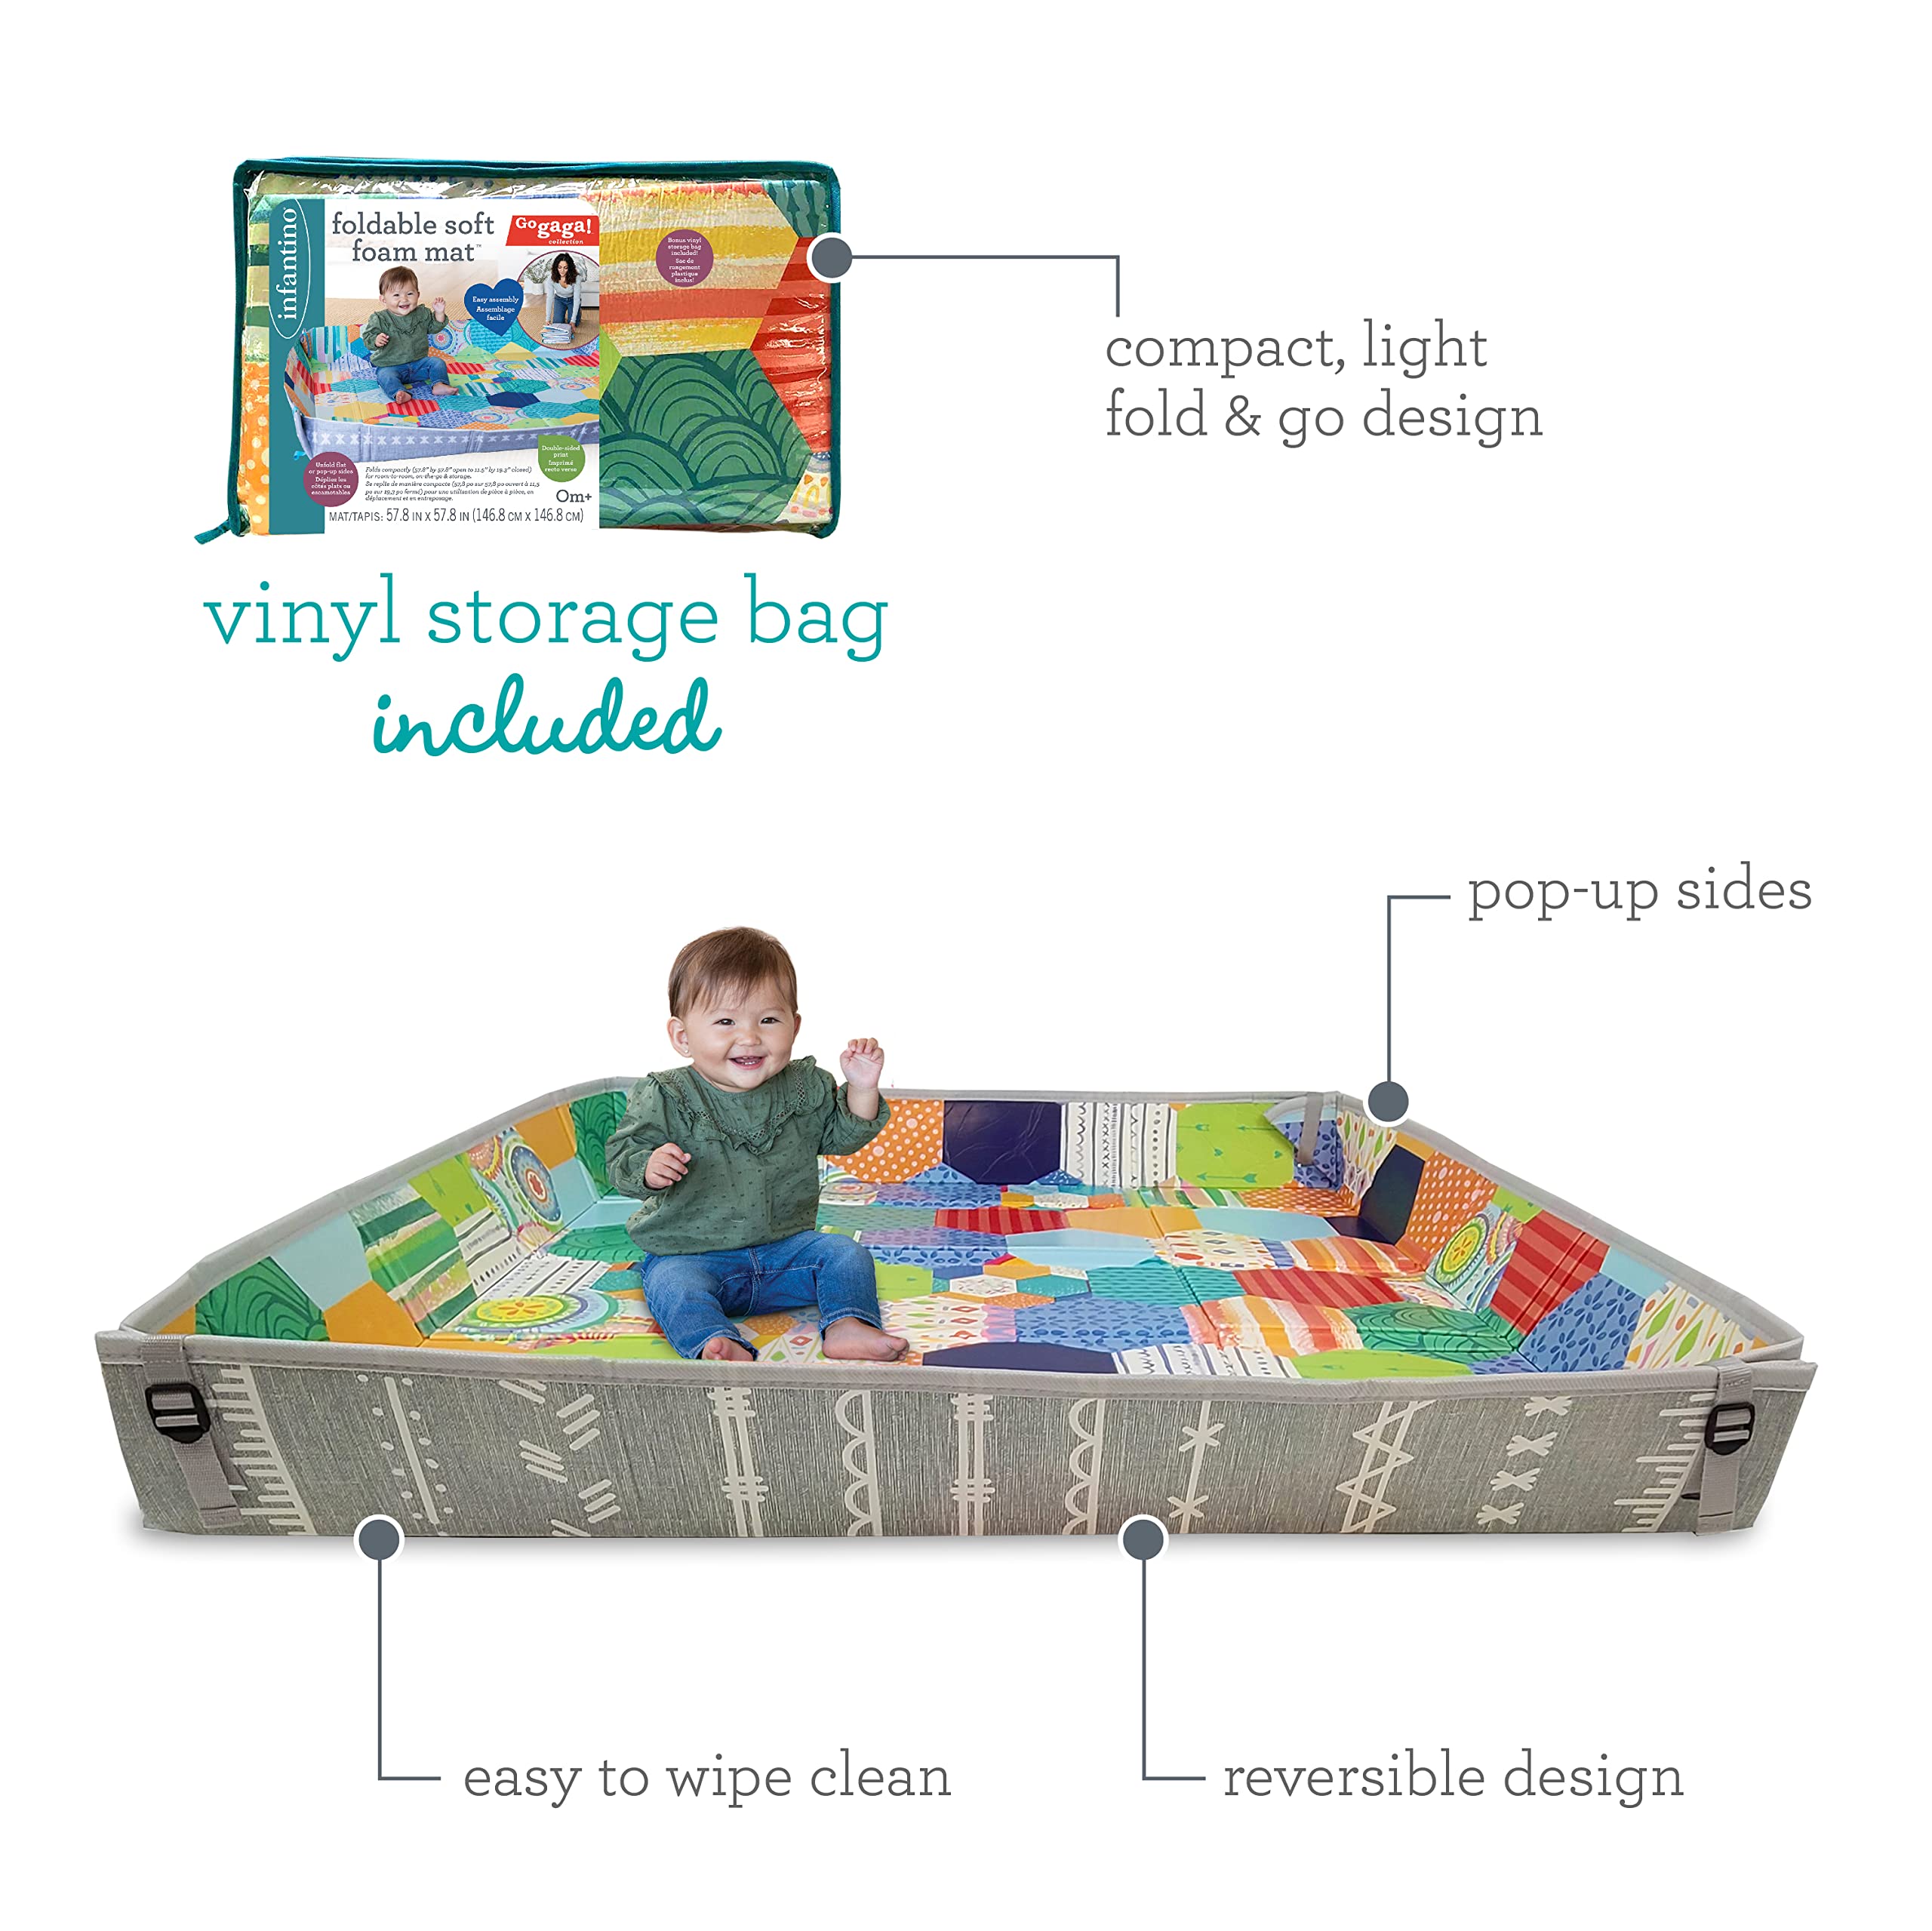 Infantino Foldable Soft Foam Mat, Extra Large Double-Sided Cushioned Play Mat with Pop-Up Sides, Non Slip Crawling & Playing for Infants and Toddlers